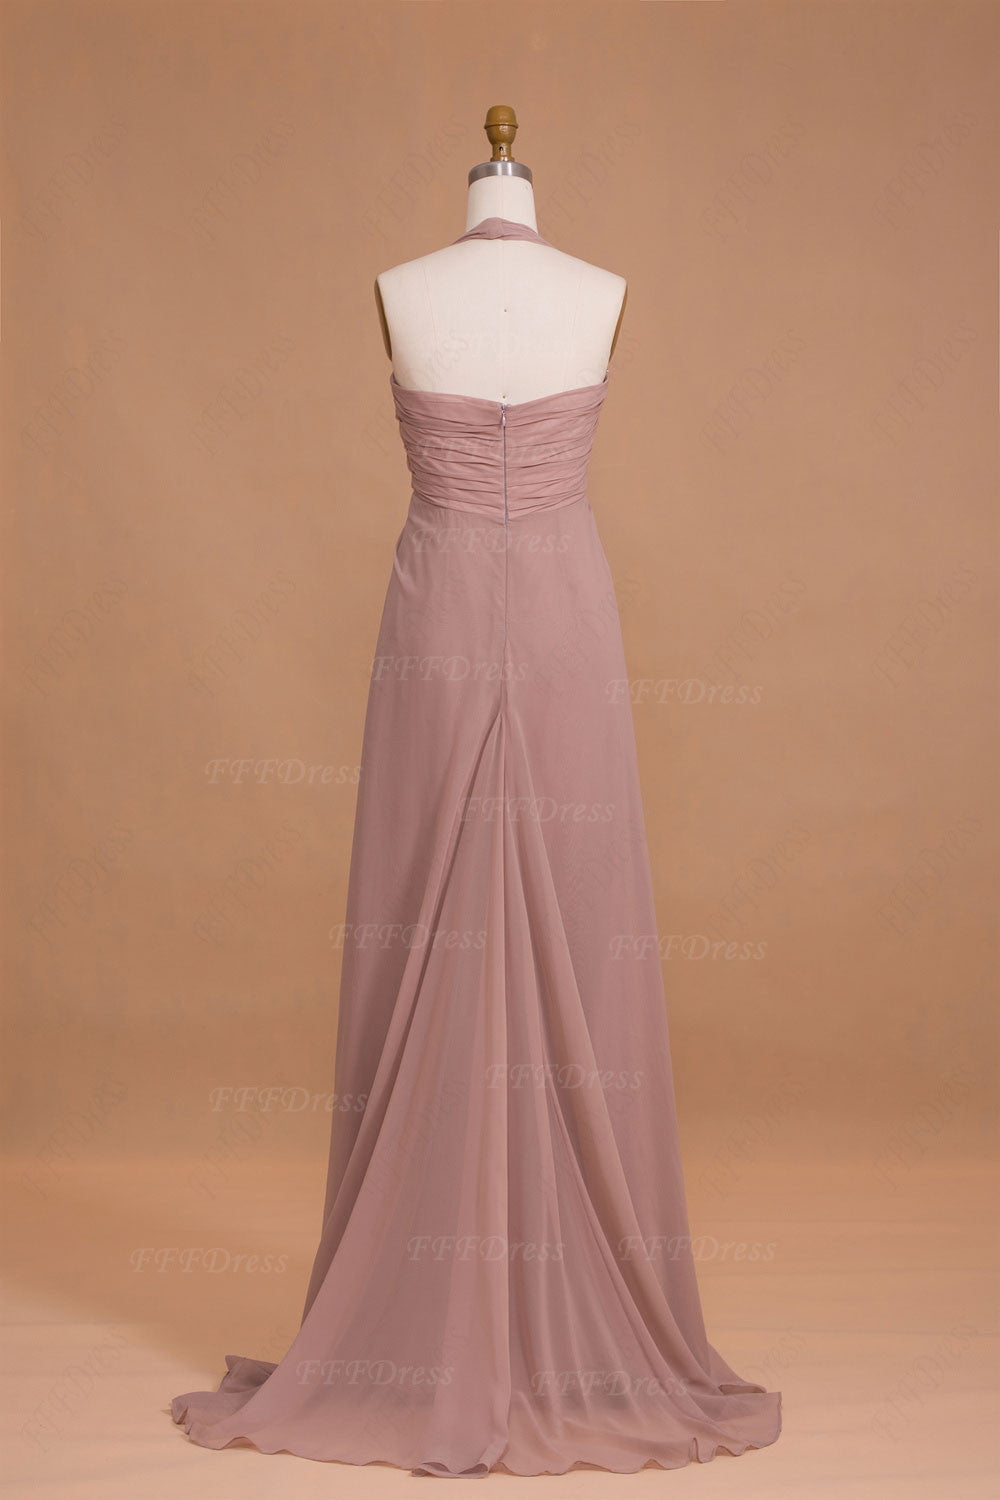 Halter Dusty rose Maternity Bridesmaid Dresses for pregnant